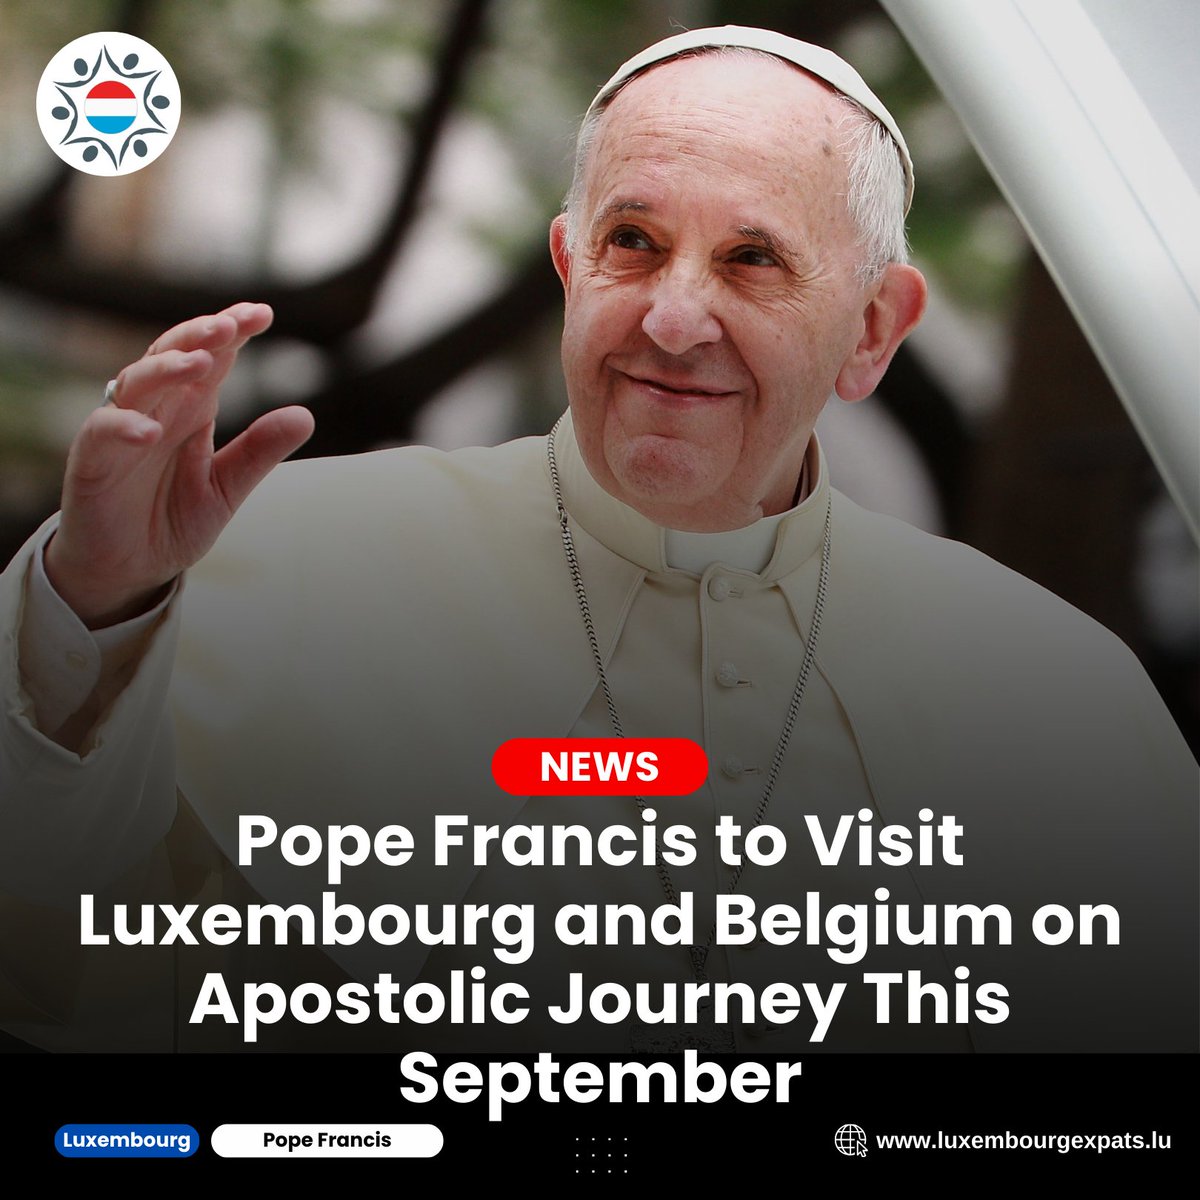 🌟 Exciting news! Pope Francis is set to visit Luxembourg and Belgium this September. A journey of unity, peace, and faith. 🕊️✨

👩🏻‍💻 Learn More Here: luxembourgexpats.lu/discussions/12…

#PapalVisit #PopeFrancis #VaticanNews #luxembourg #luxembourgcity🇱🇺 #expat #luxembourgexpats #expatlife